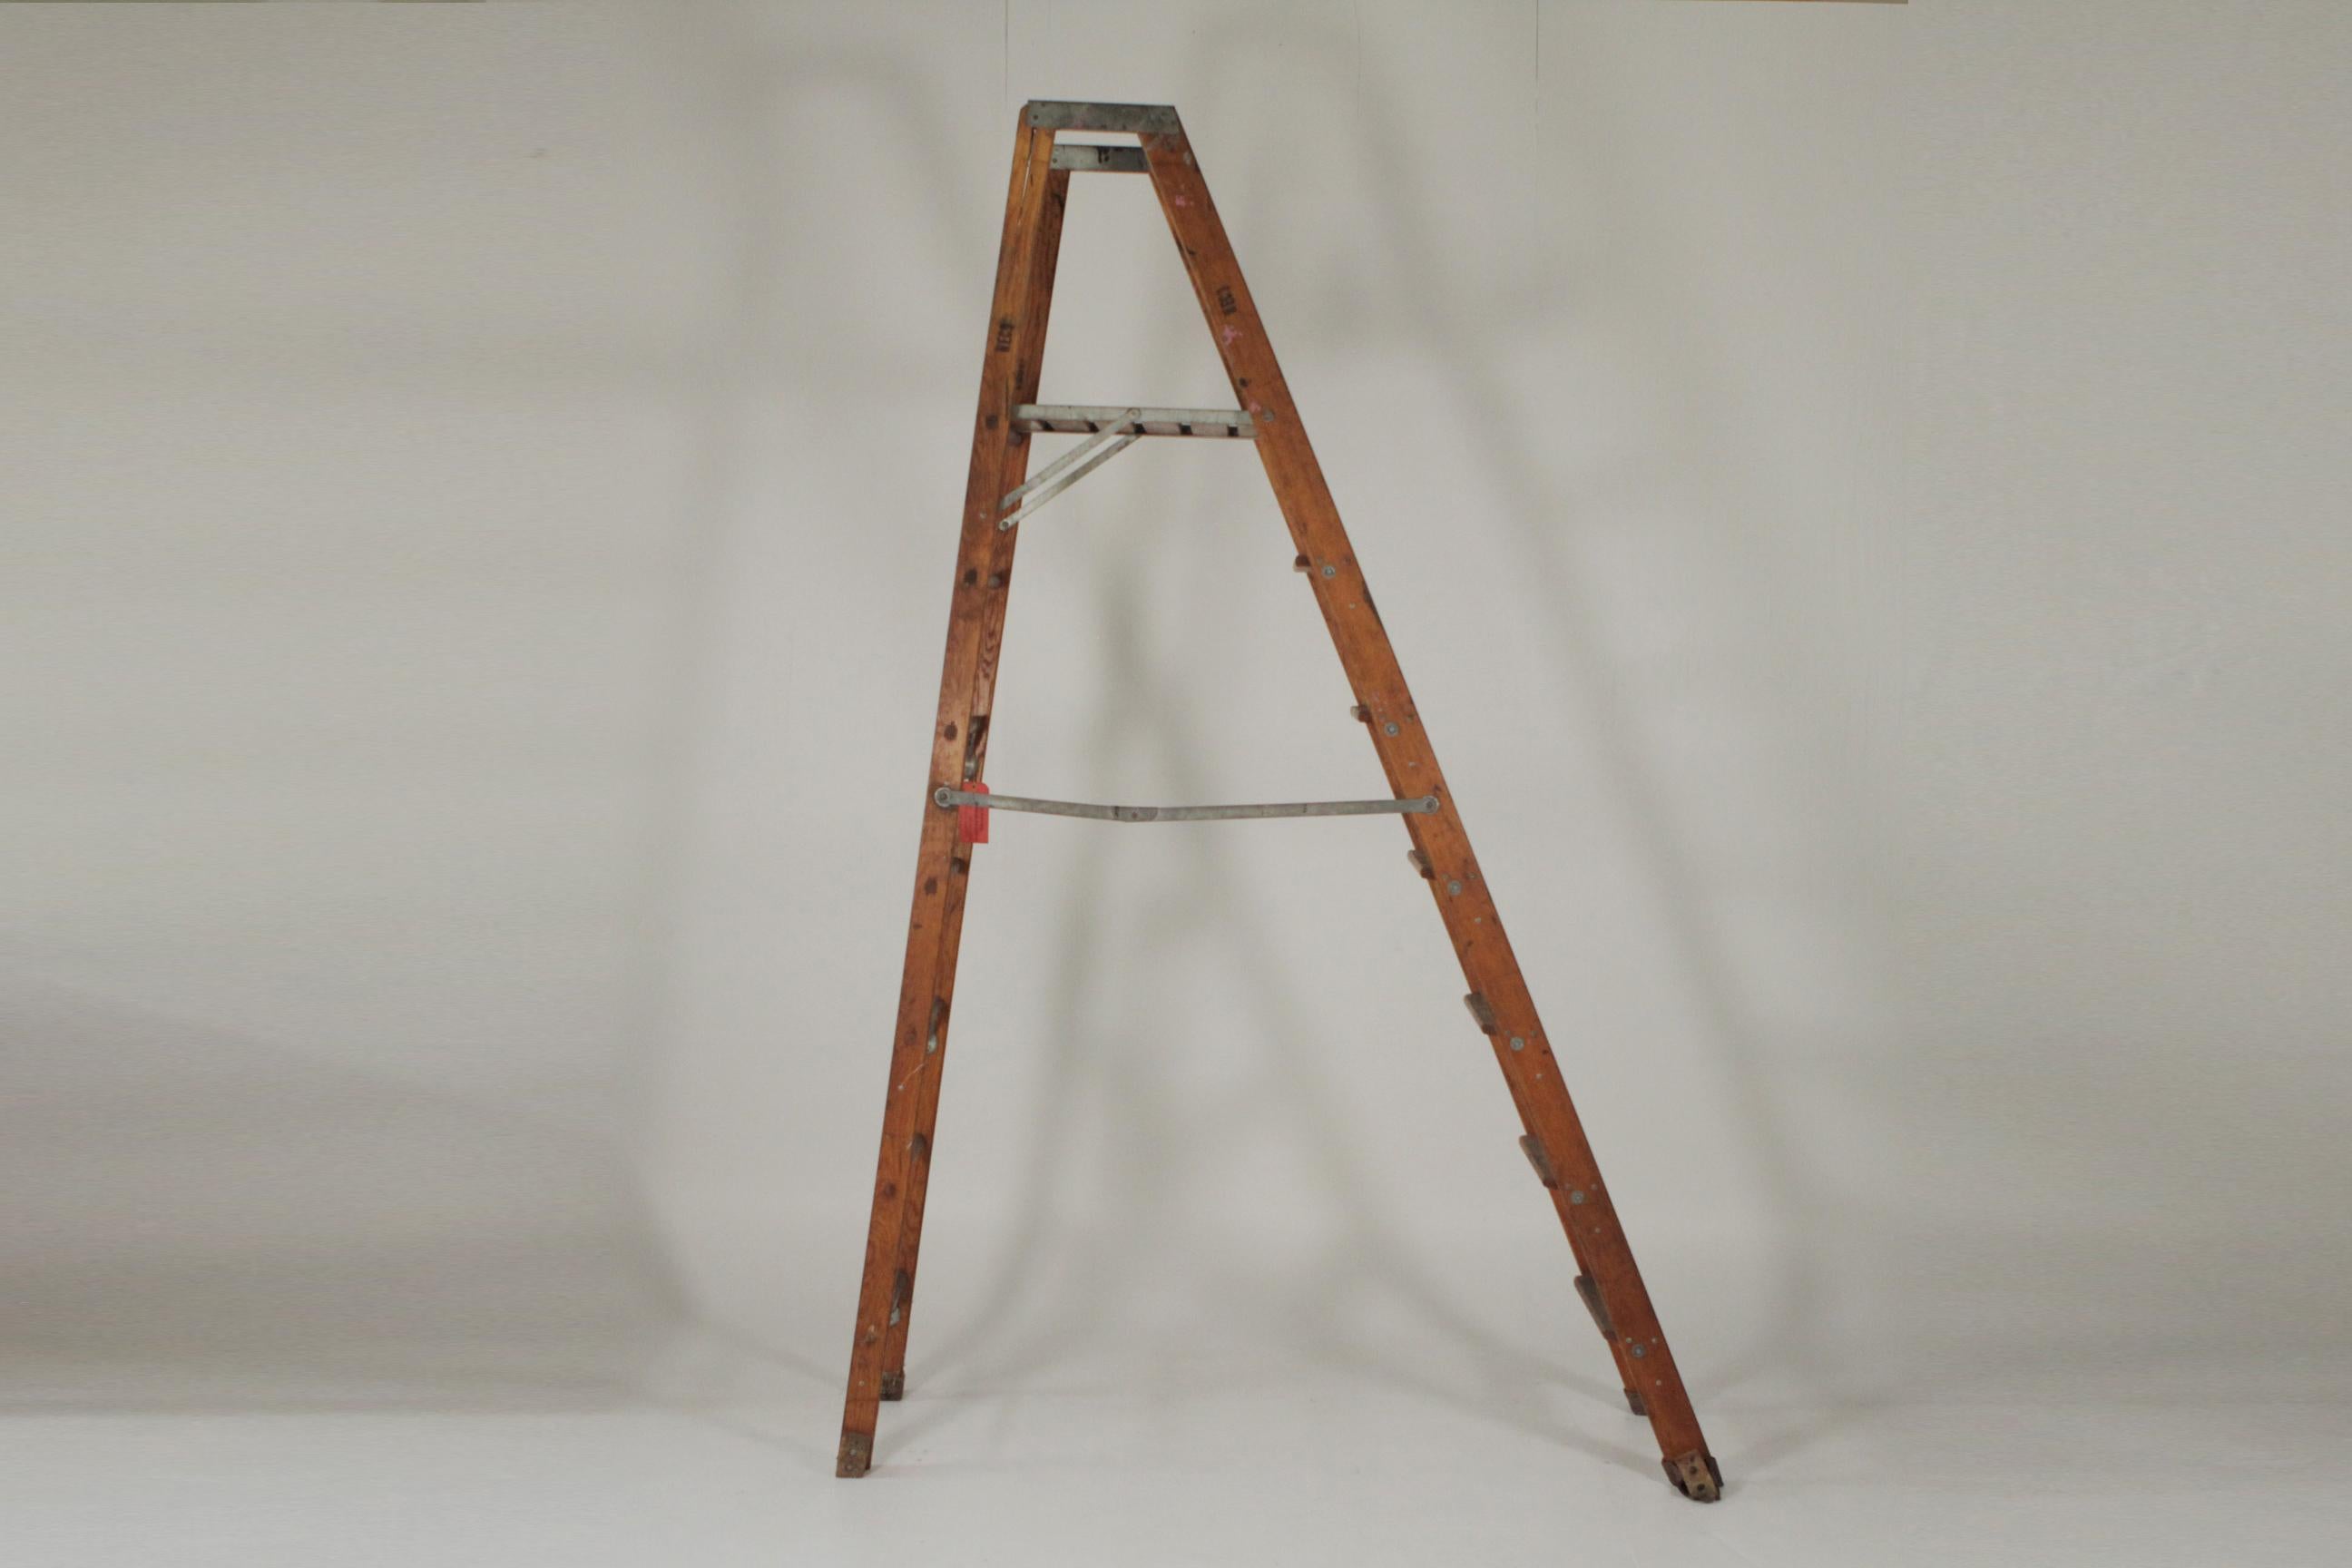 Early 20th century industrial folding ladder, one missing side support, great as a prop or display
99